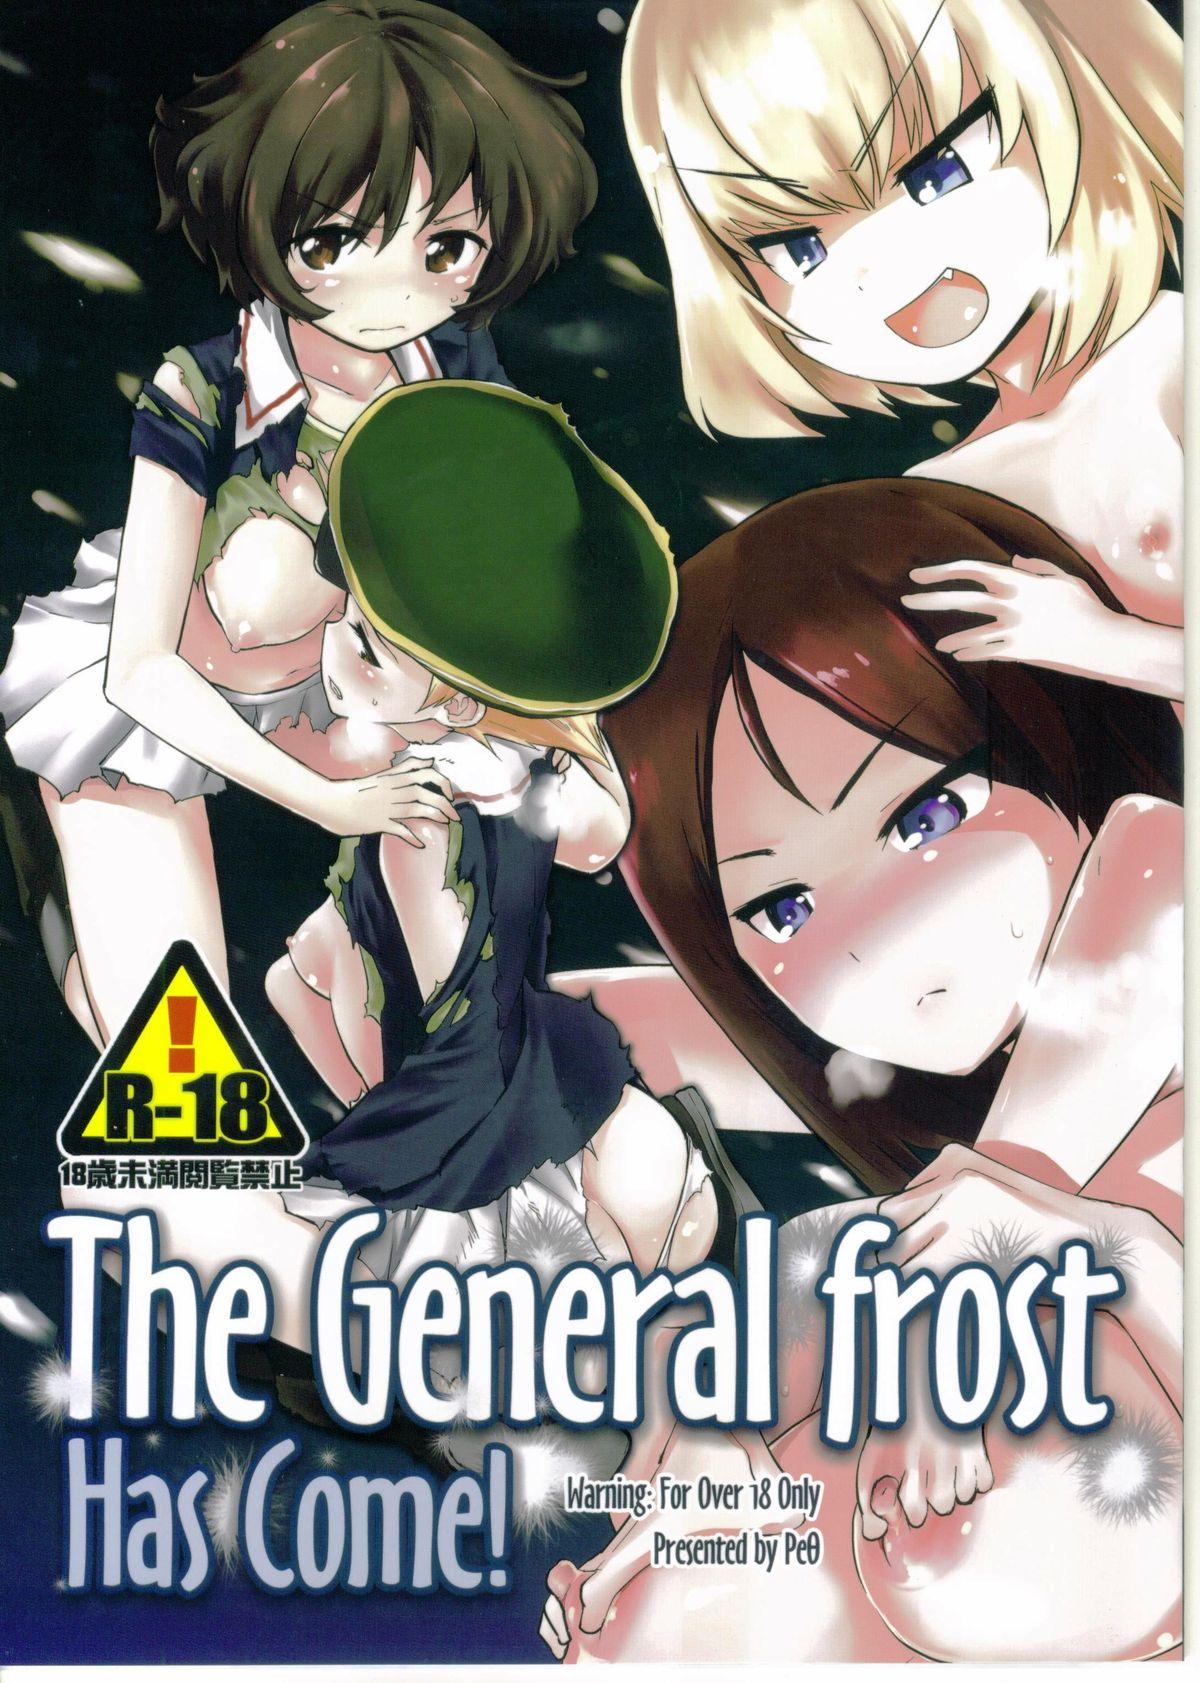 Blackwoman The General Frost Has Come! - Girls und panzer Retro - Page 1